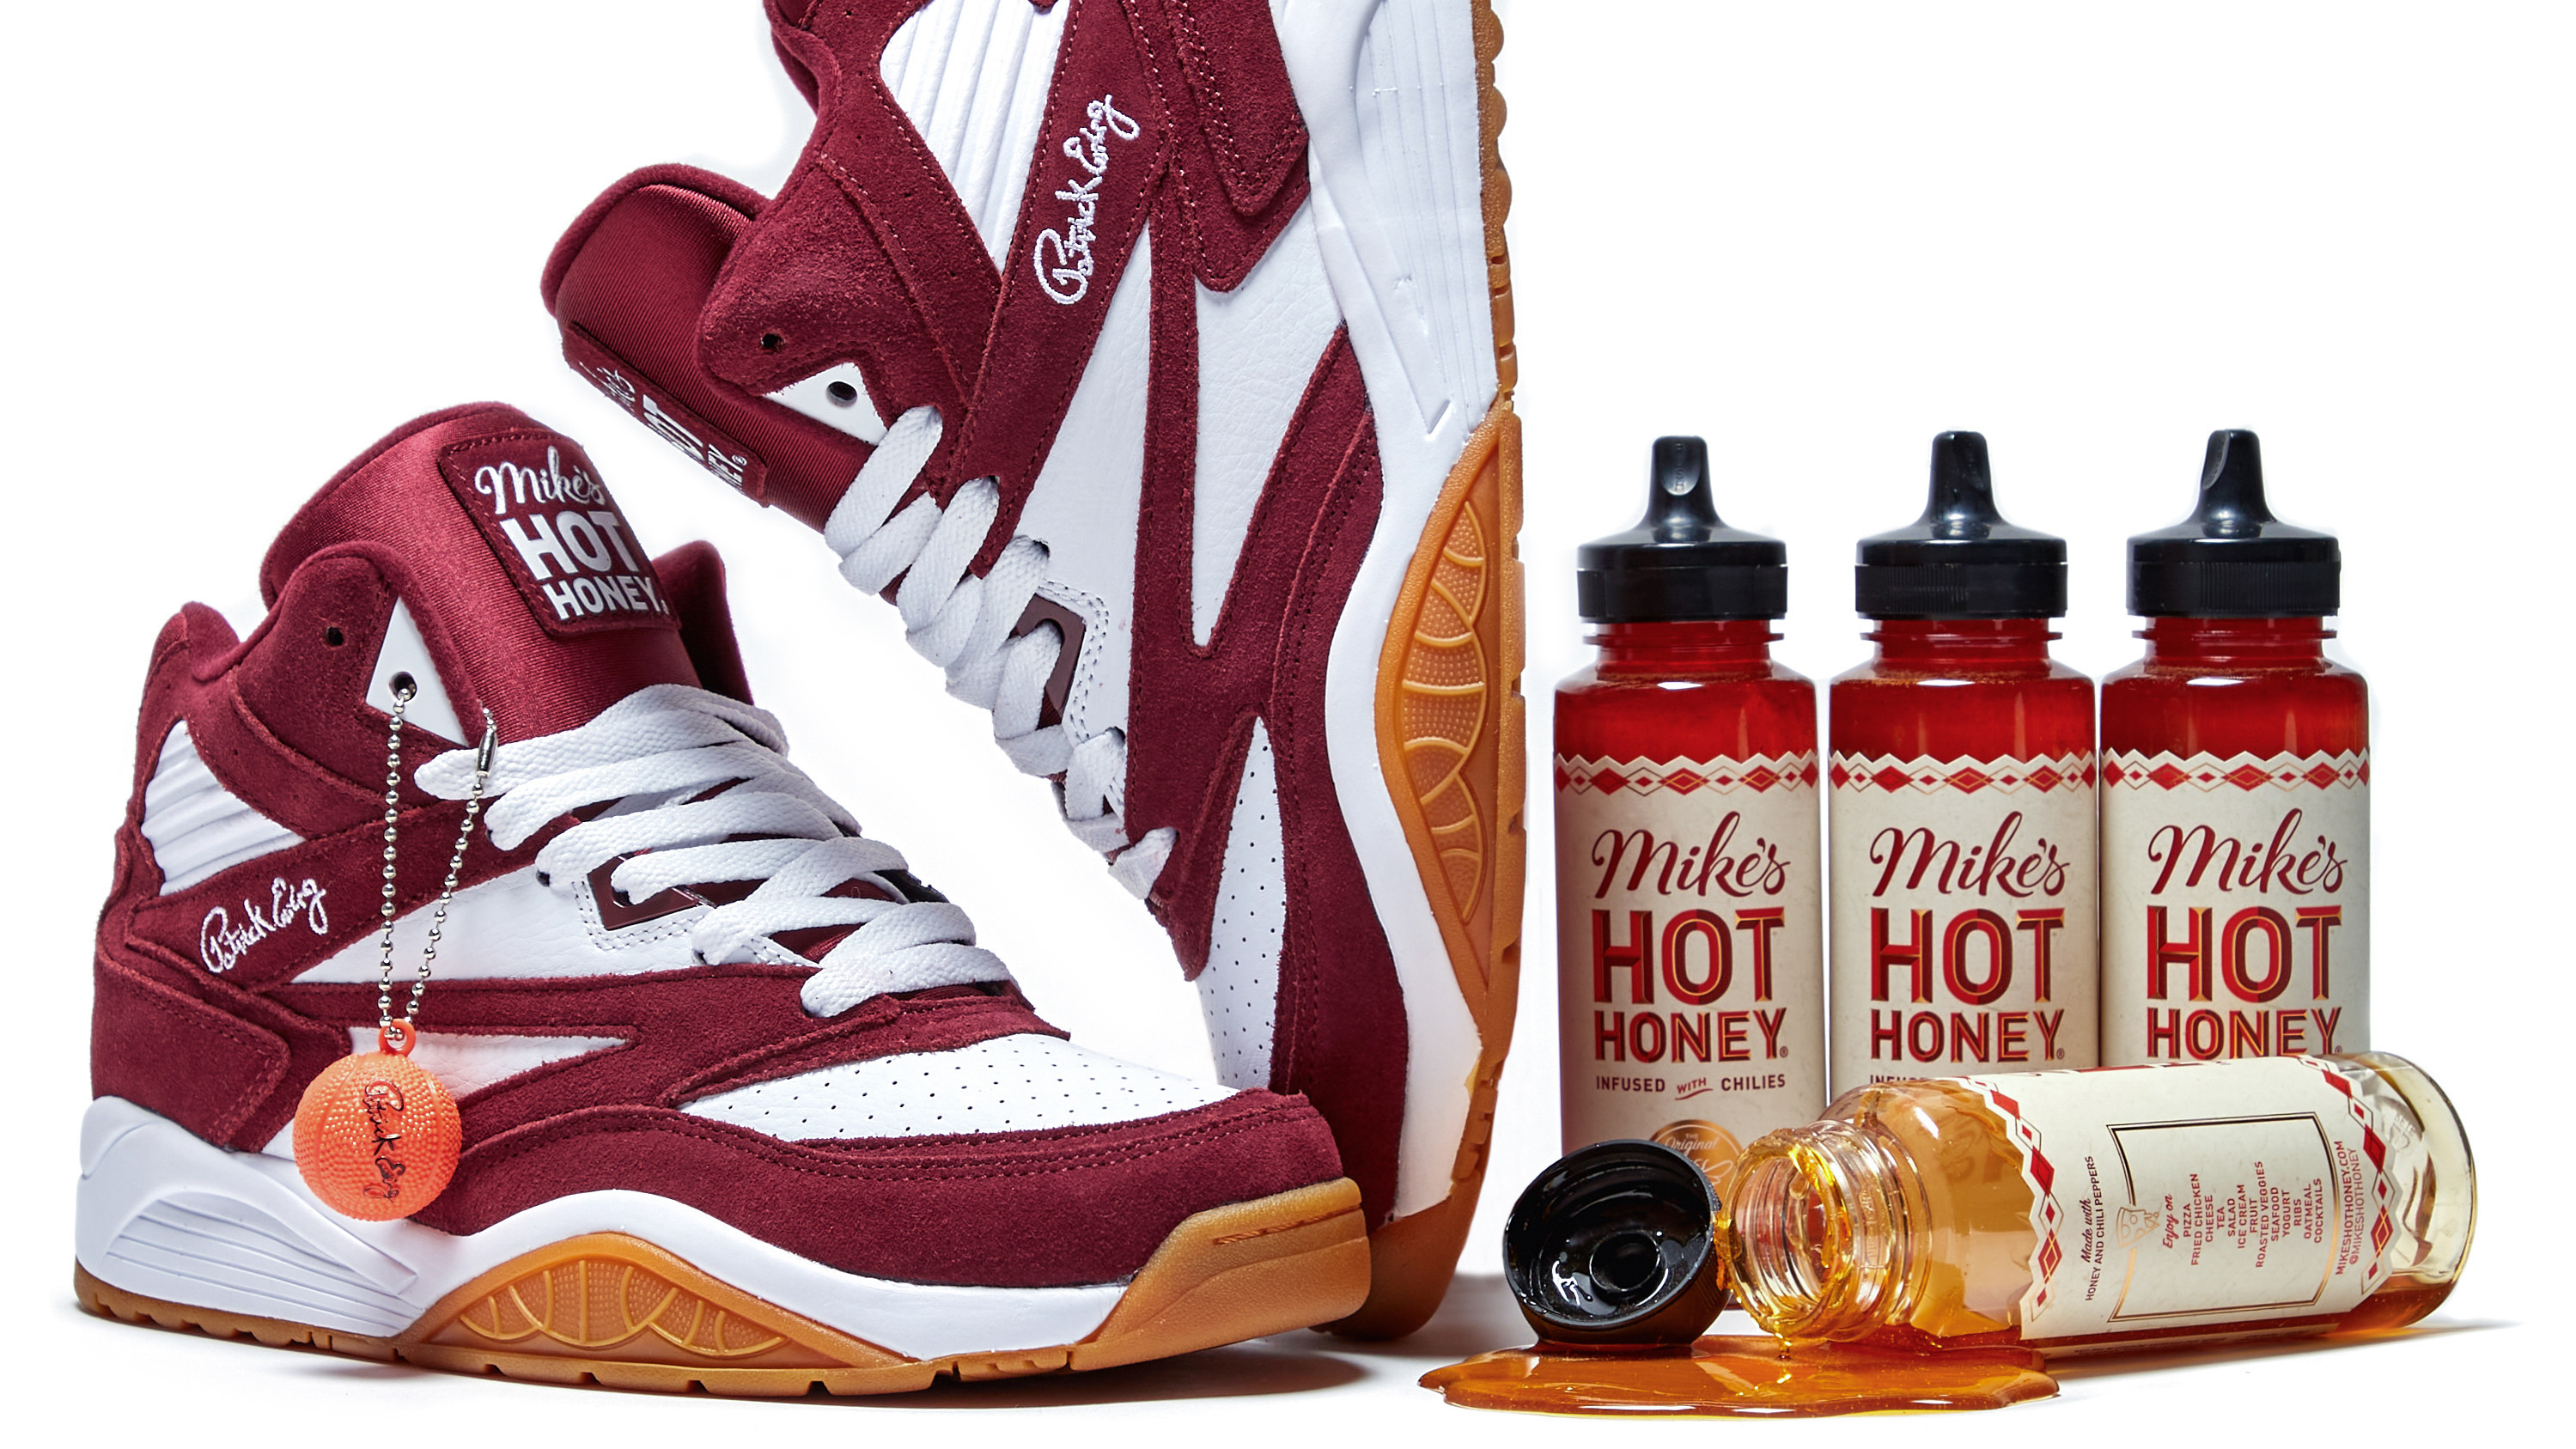 Mike's Hot Honey's Ewing Sport Lite Collab Drops This Week